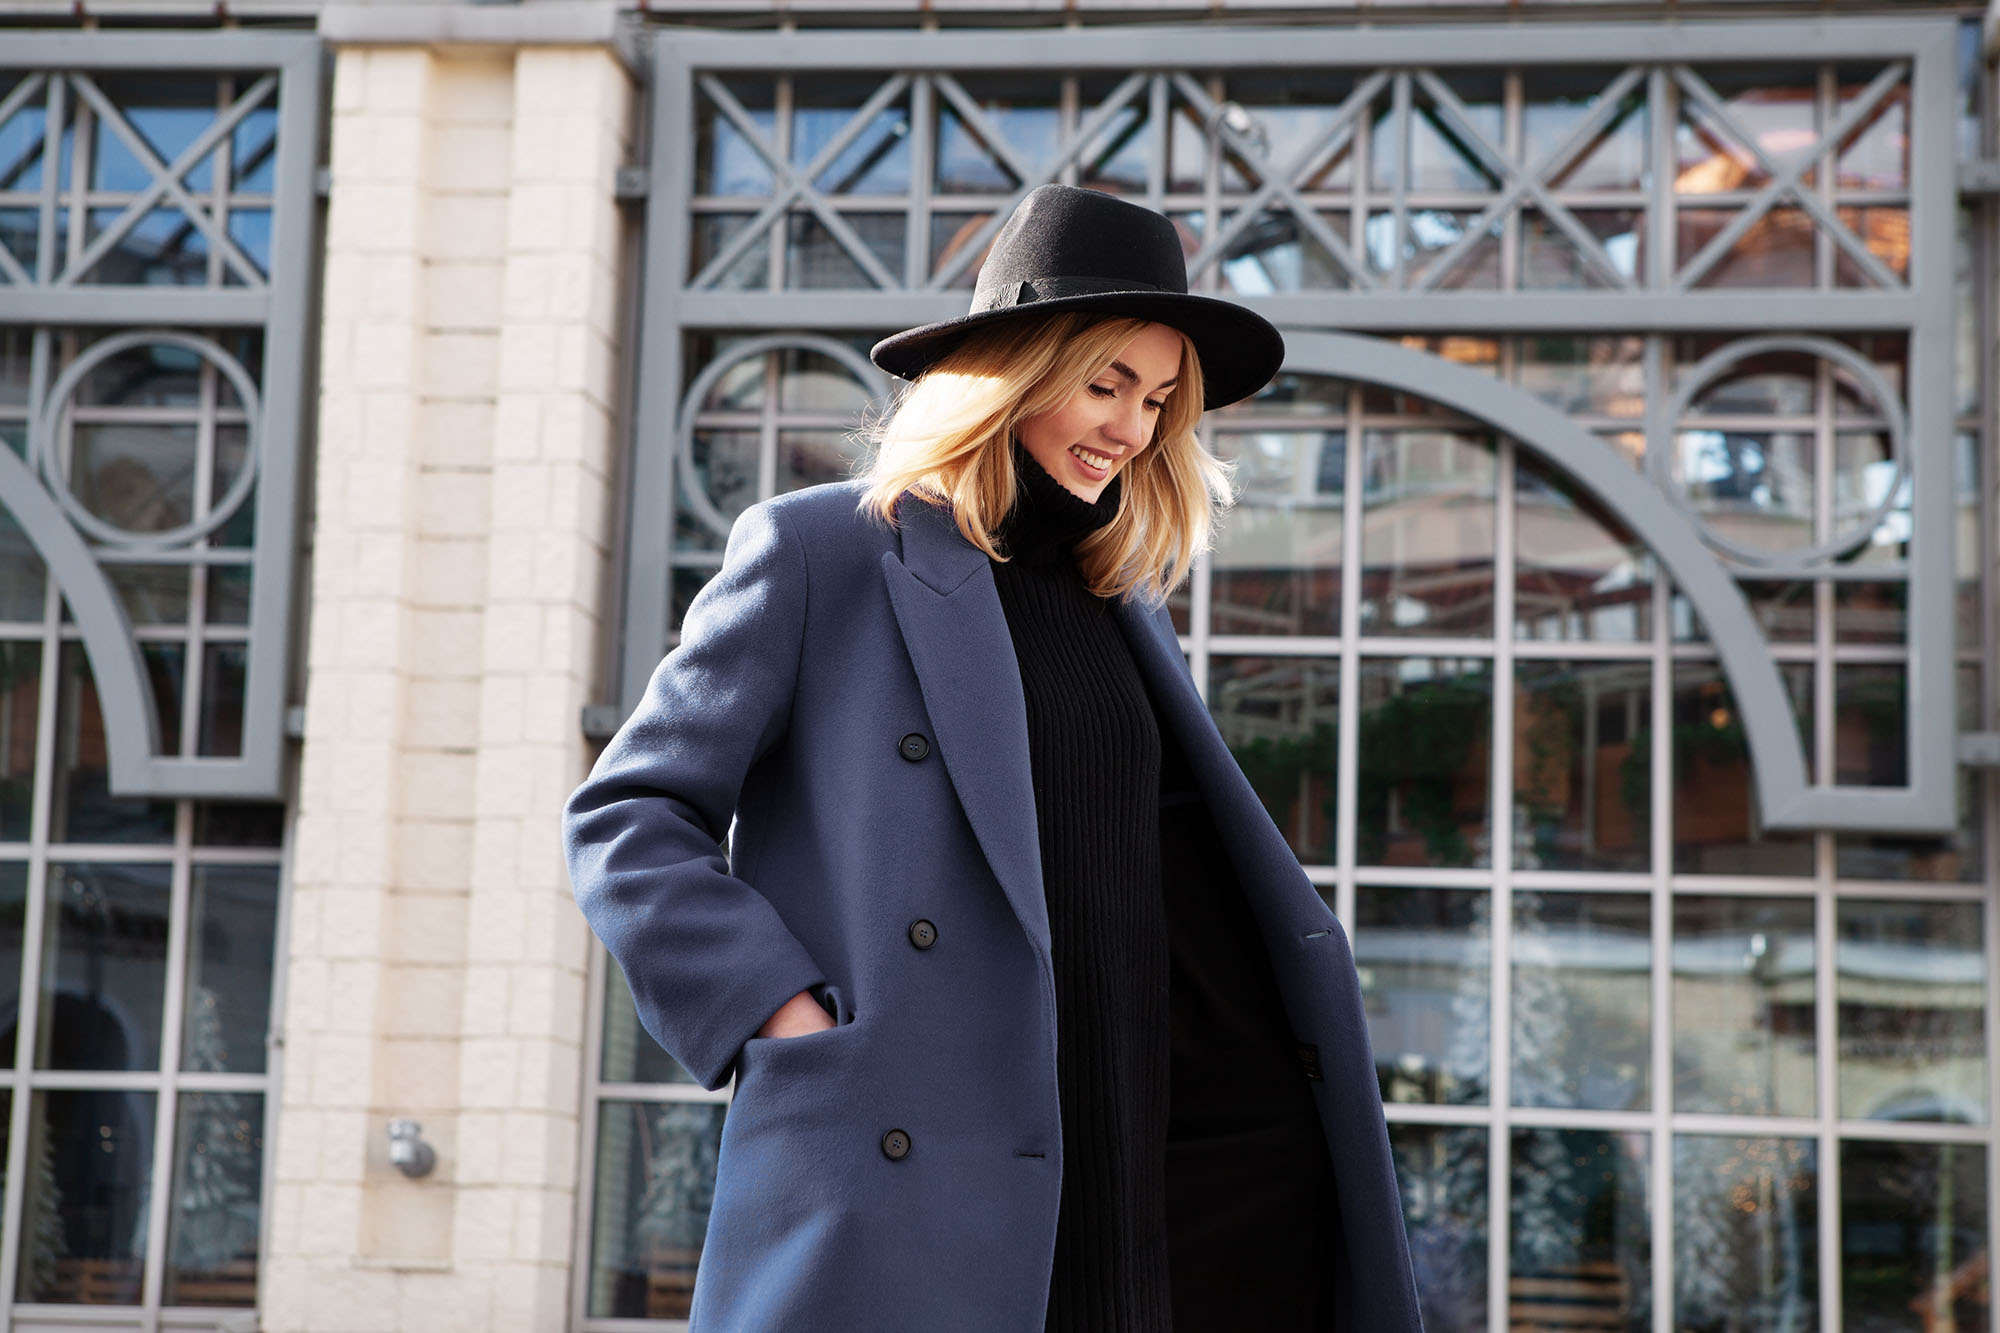 13 of Nordstrom's Most Fashionable Coats and Jackets for Fall